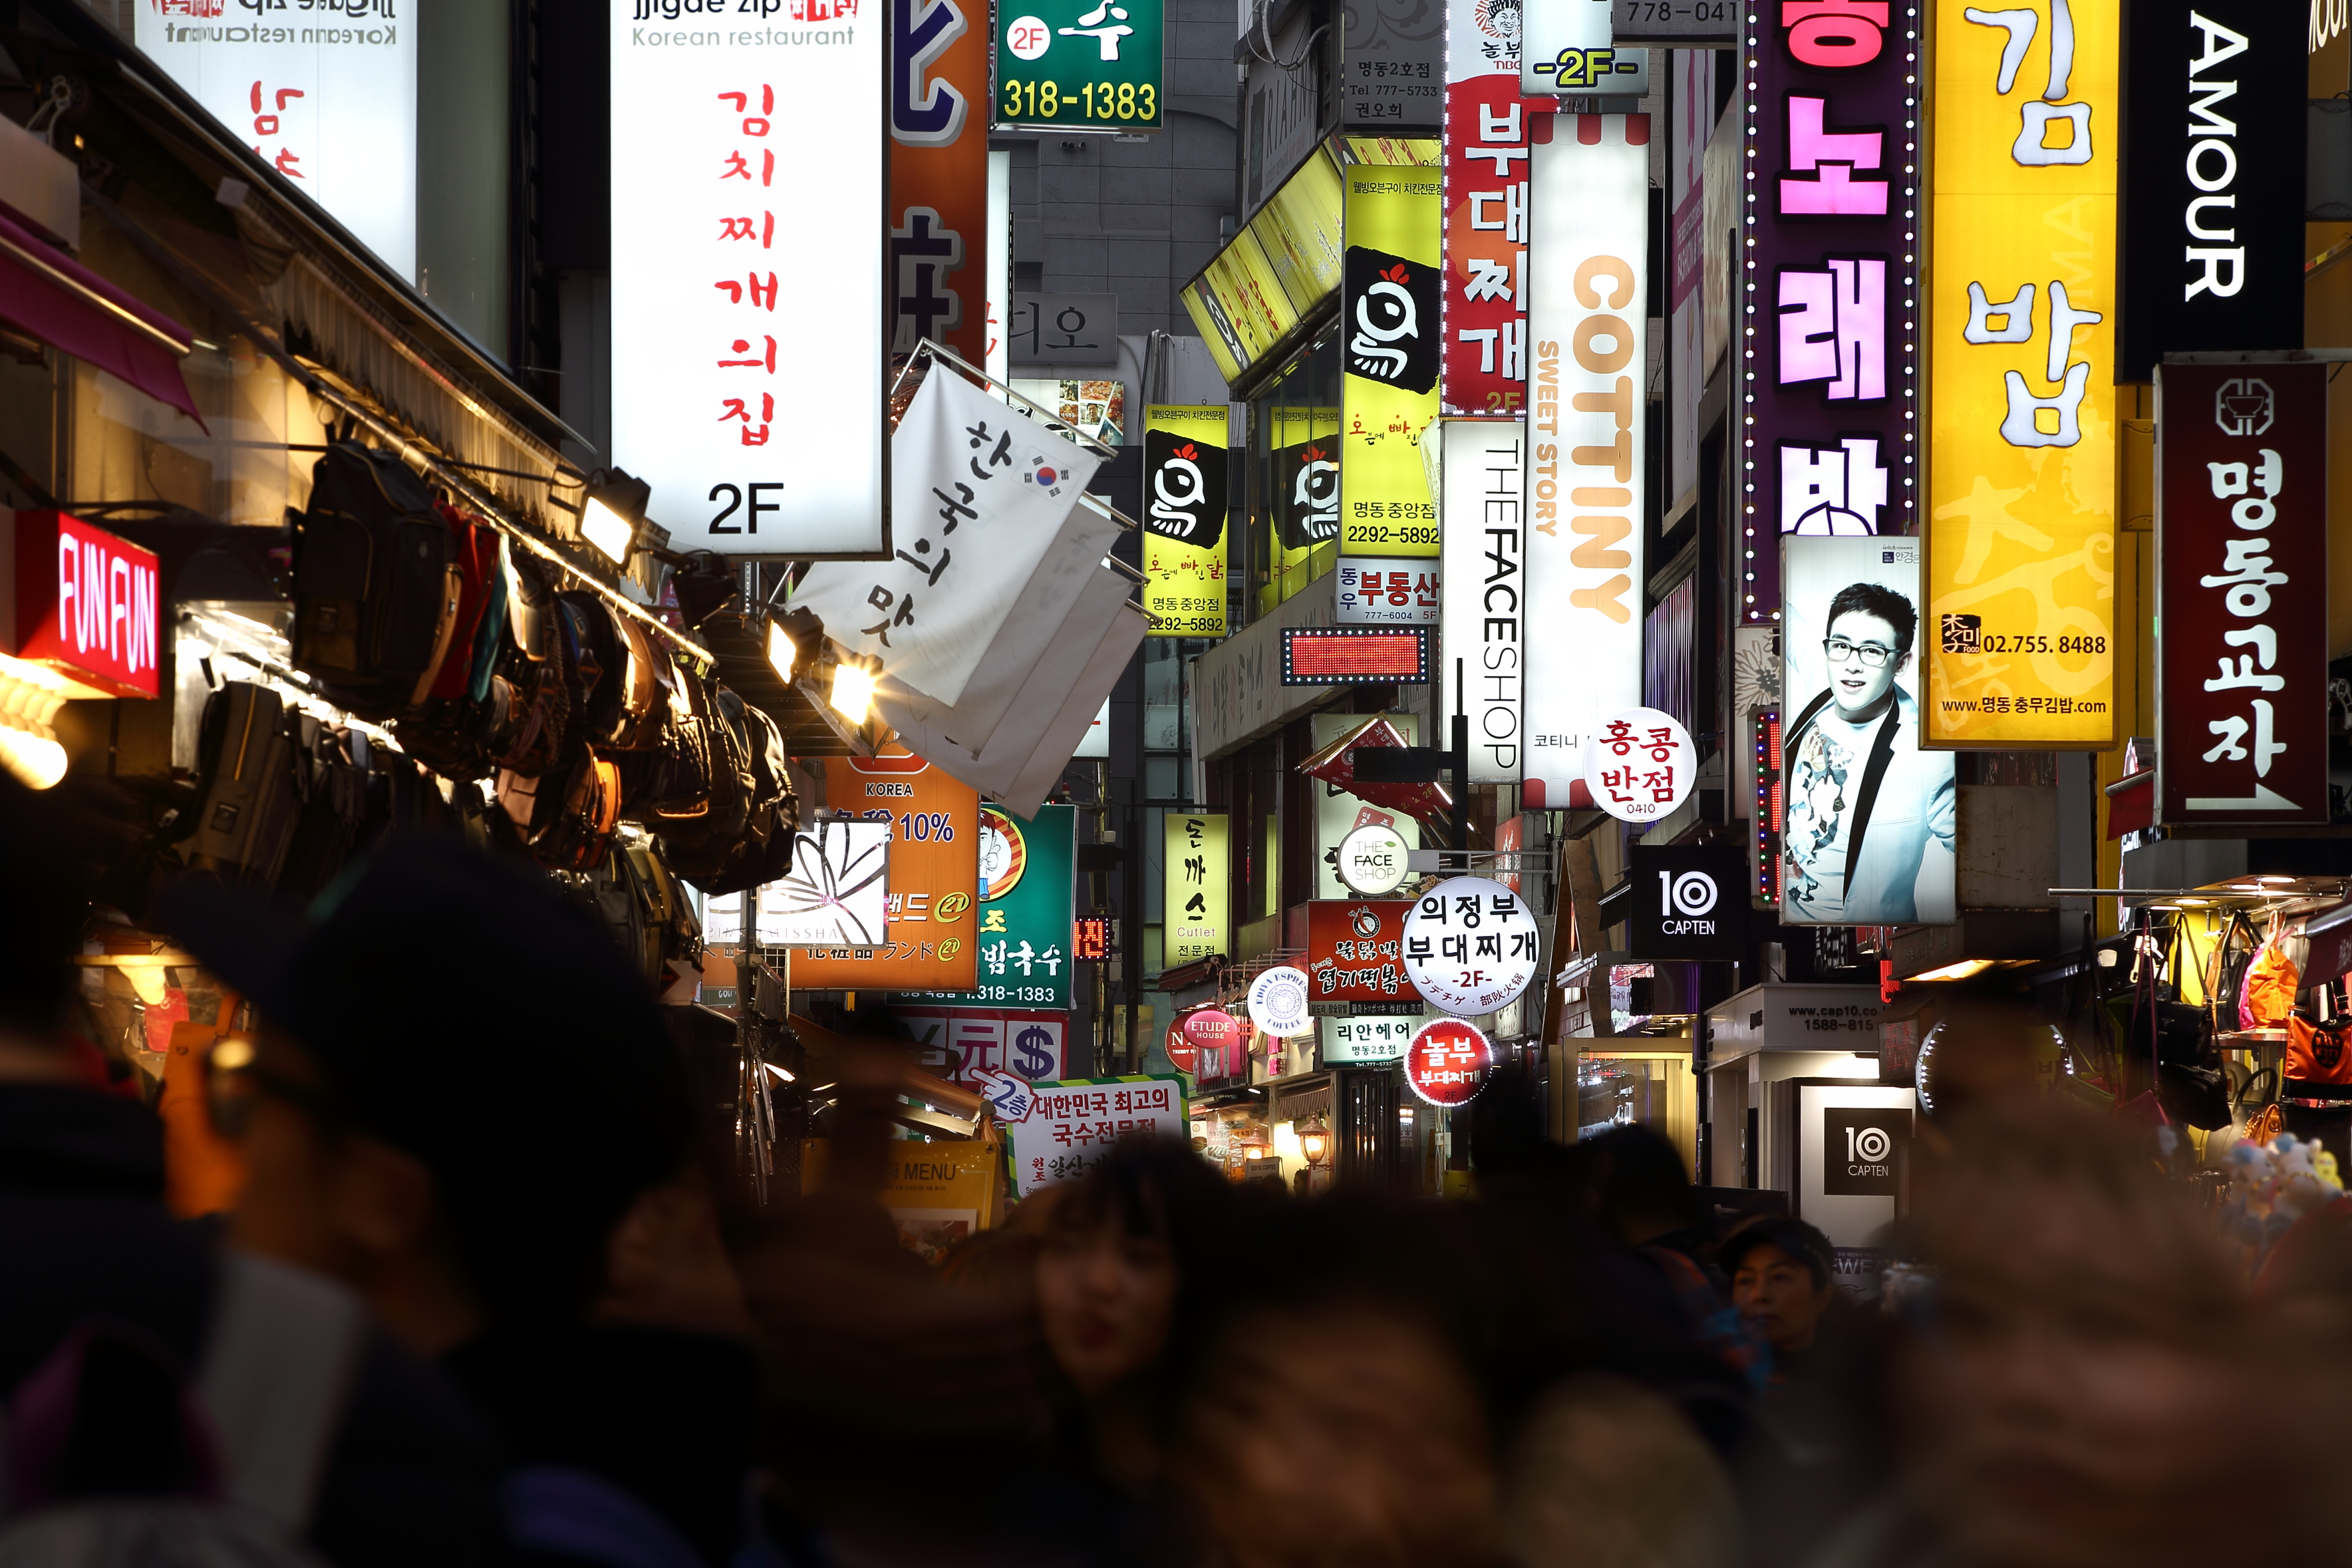 Illuminated signboards light up a street in the evening in the Myeongdong district of Seoul, South Korea, on Feb. 27, 2014. (SeongJoon Cho—Bloomberg/Getty Images)